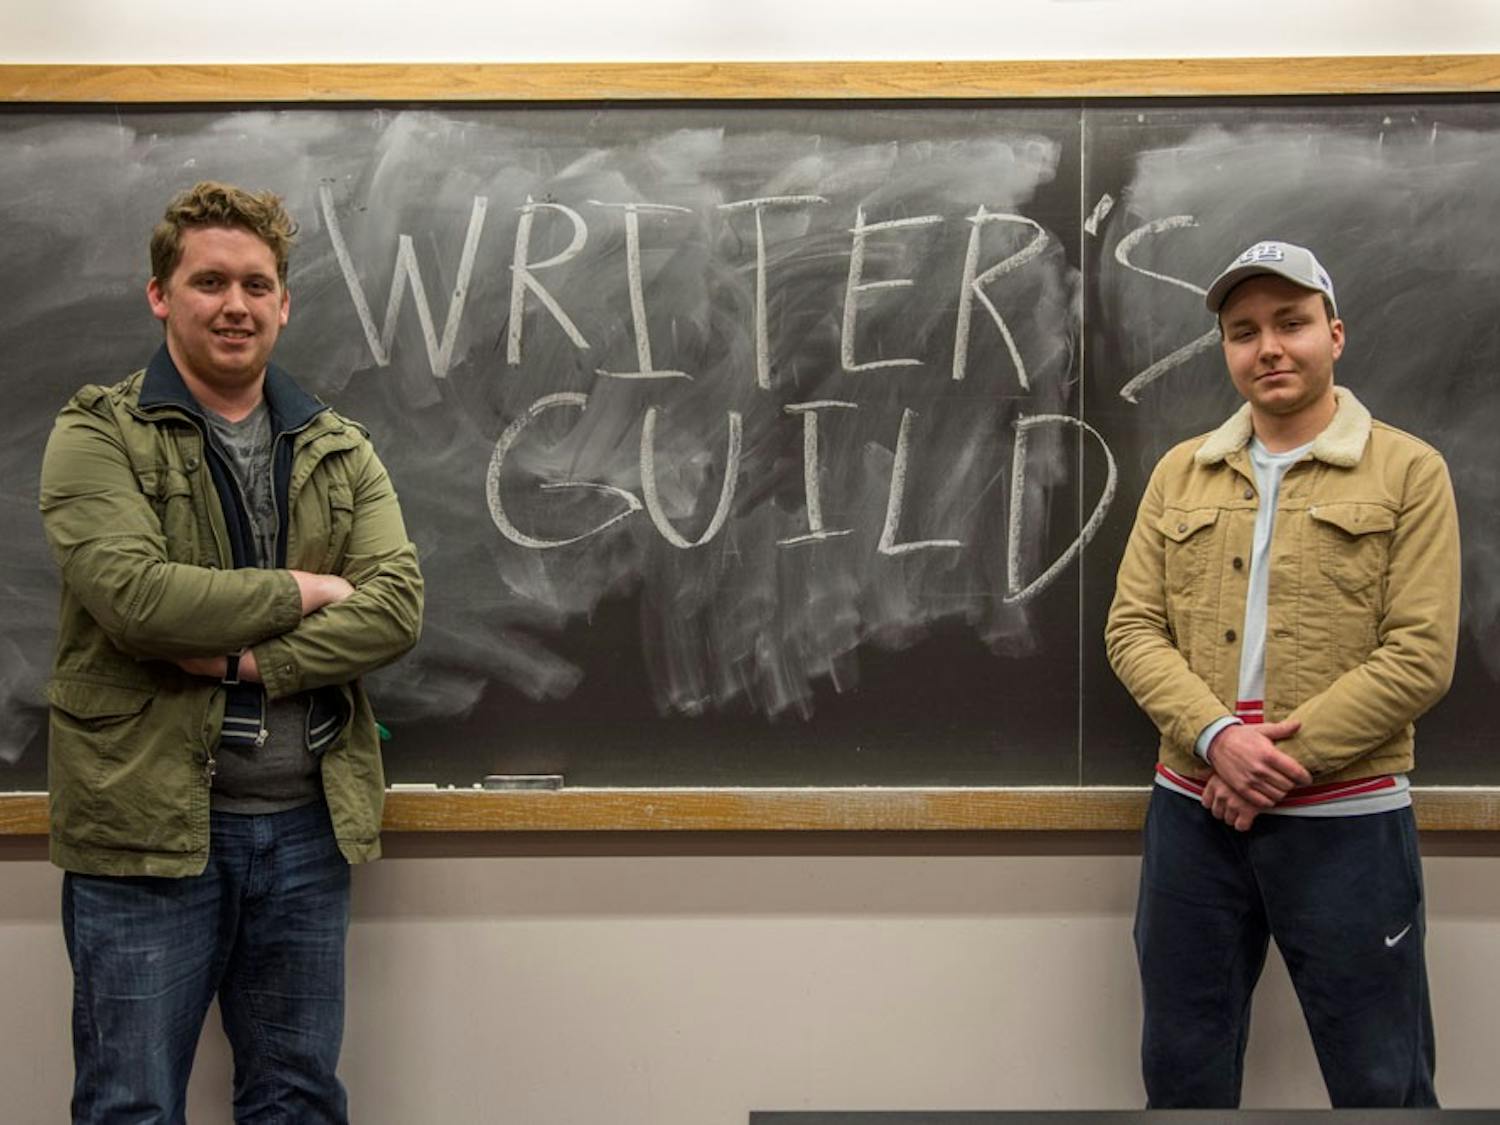 The Writer’s Guild, a new club formed on UB, was founded to help develop the skills of anyone who is interested in writing fiction.